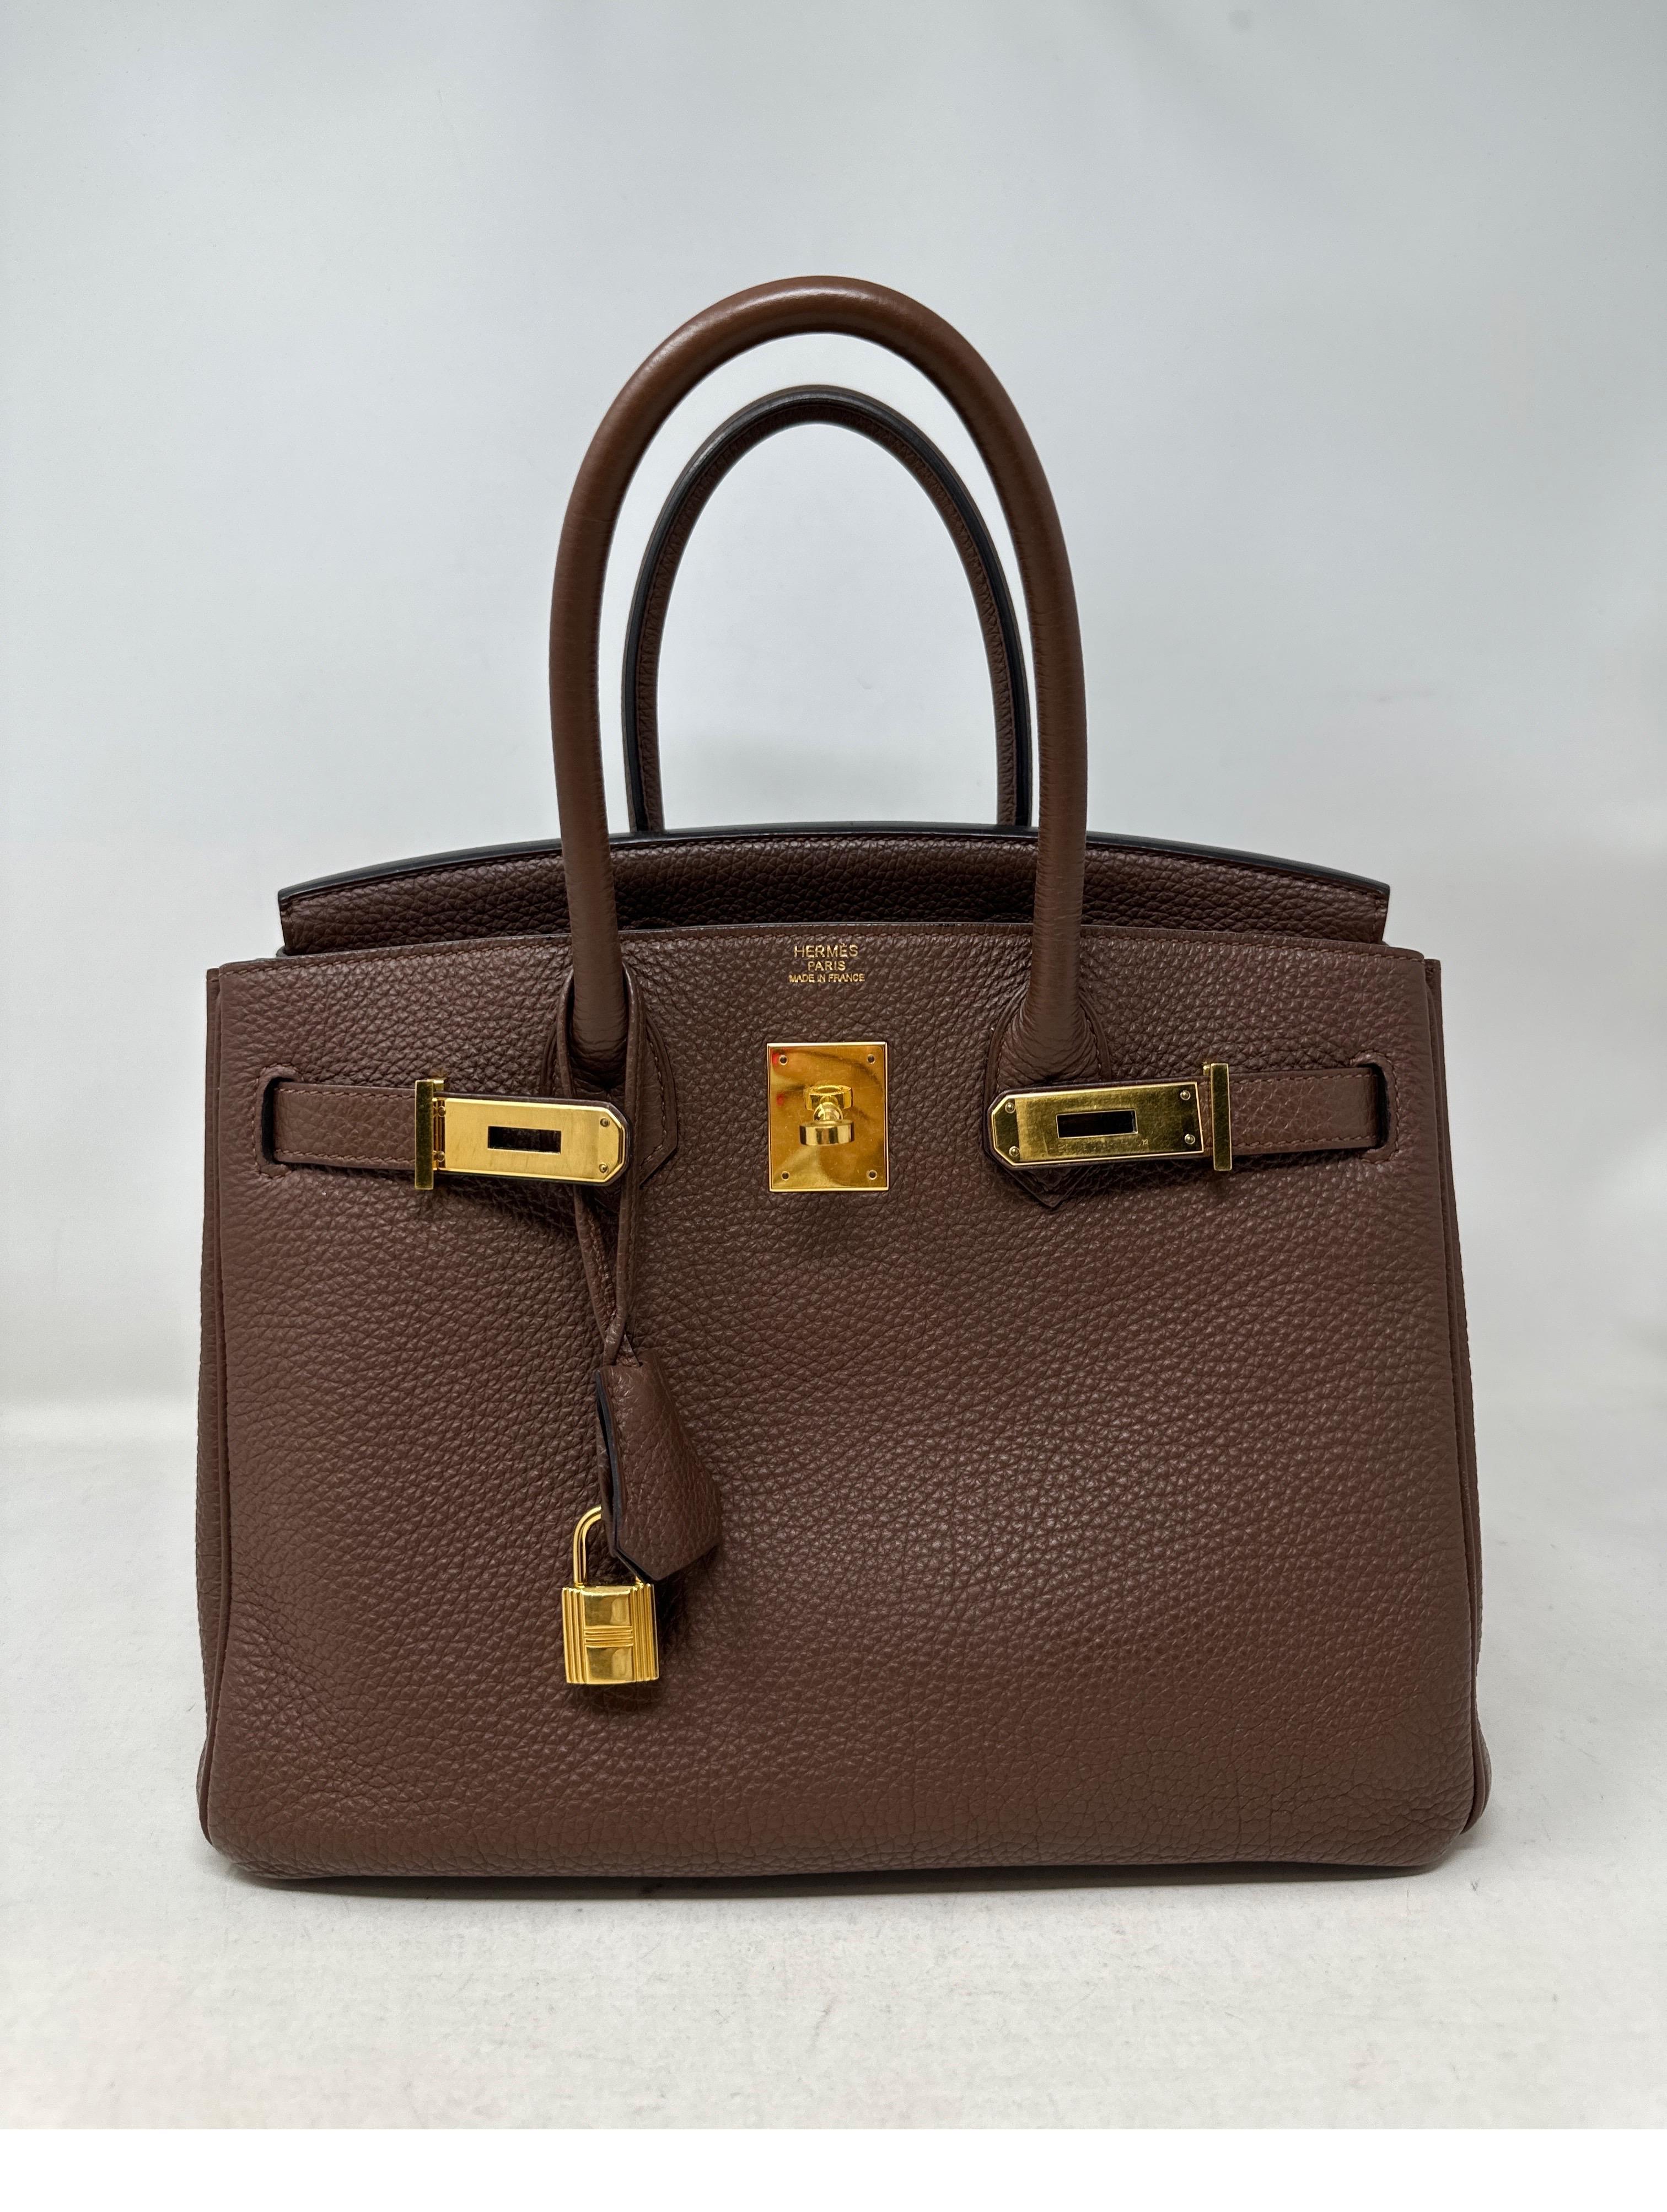 Hermes Brown Birkin 30 Bag. Neutral brown color with gold hardware. Togo leather. Interior clean. Good condition. Includes clochette, lock, keys, and dust bag. Guaranteed authentic. 